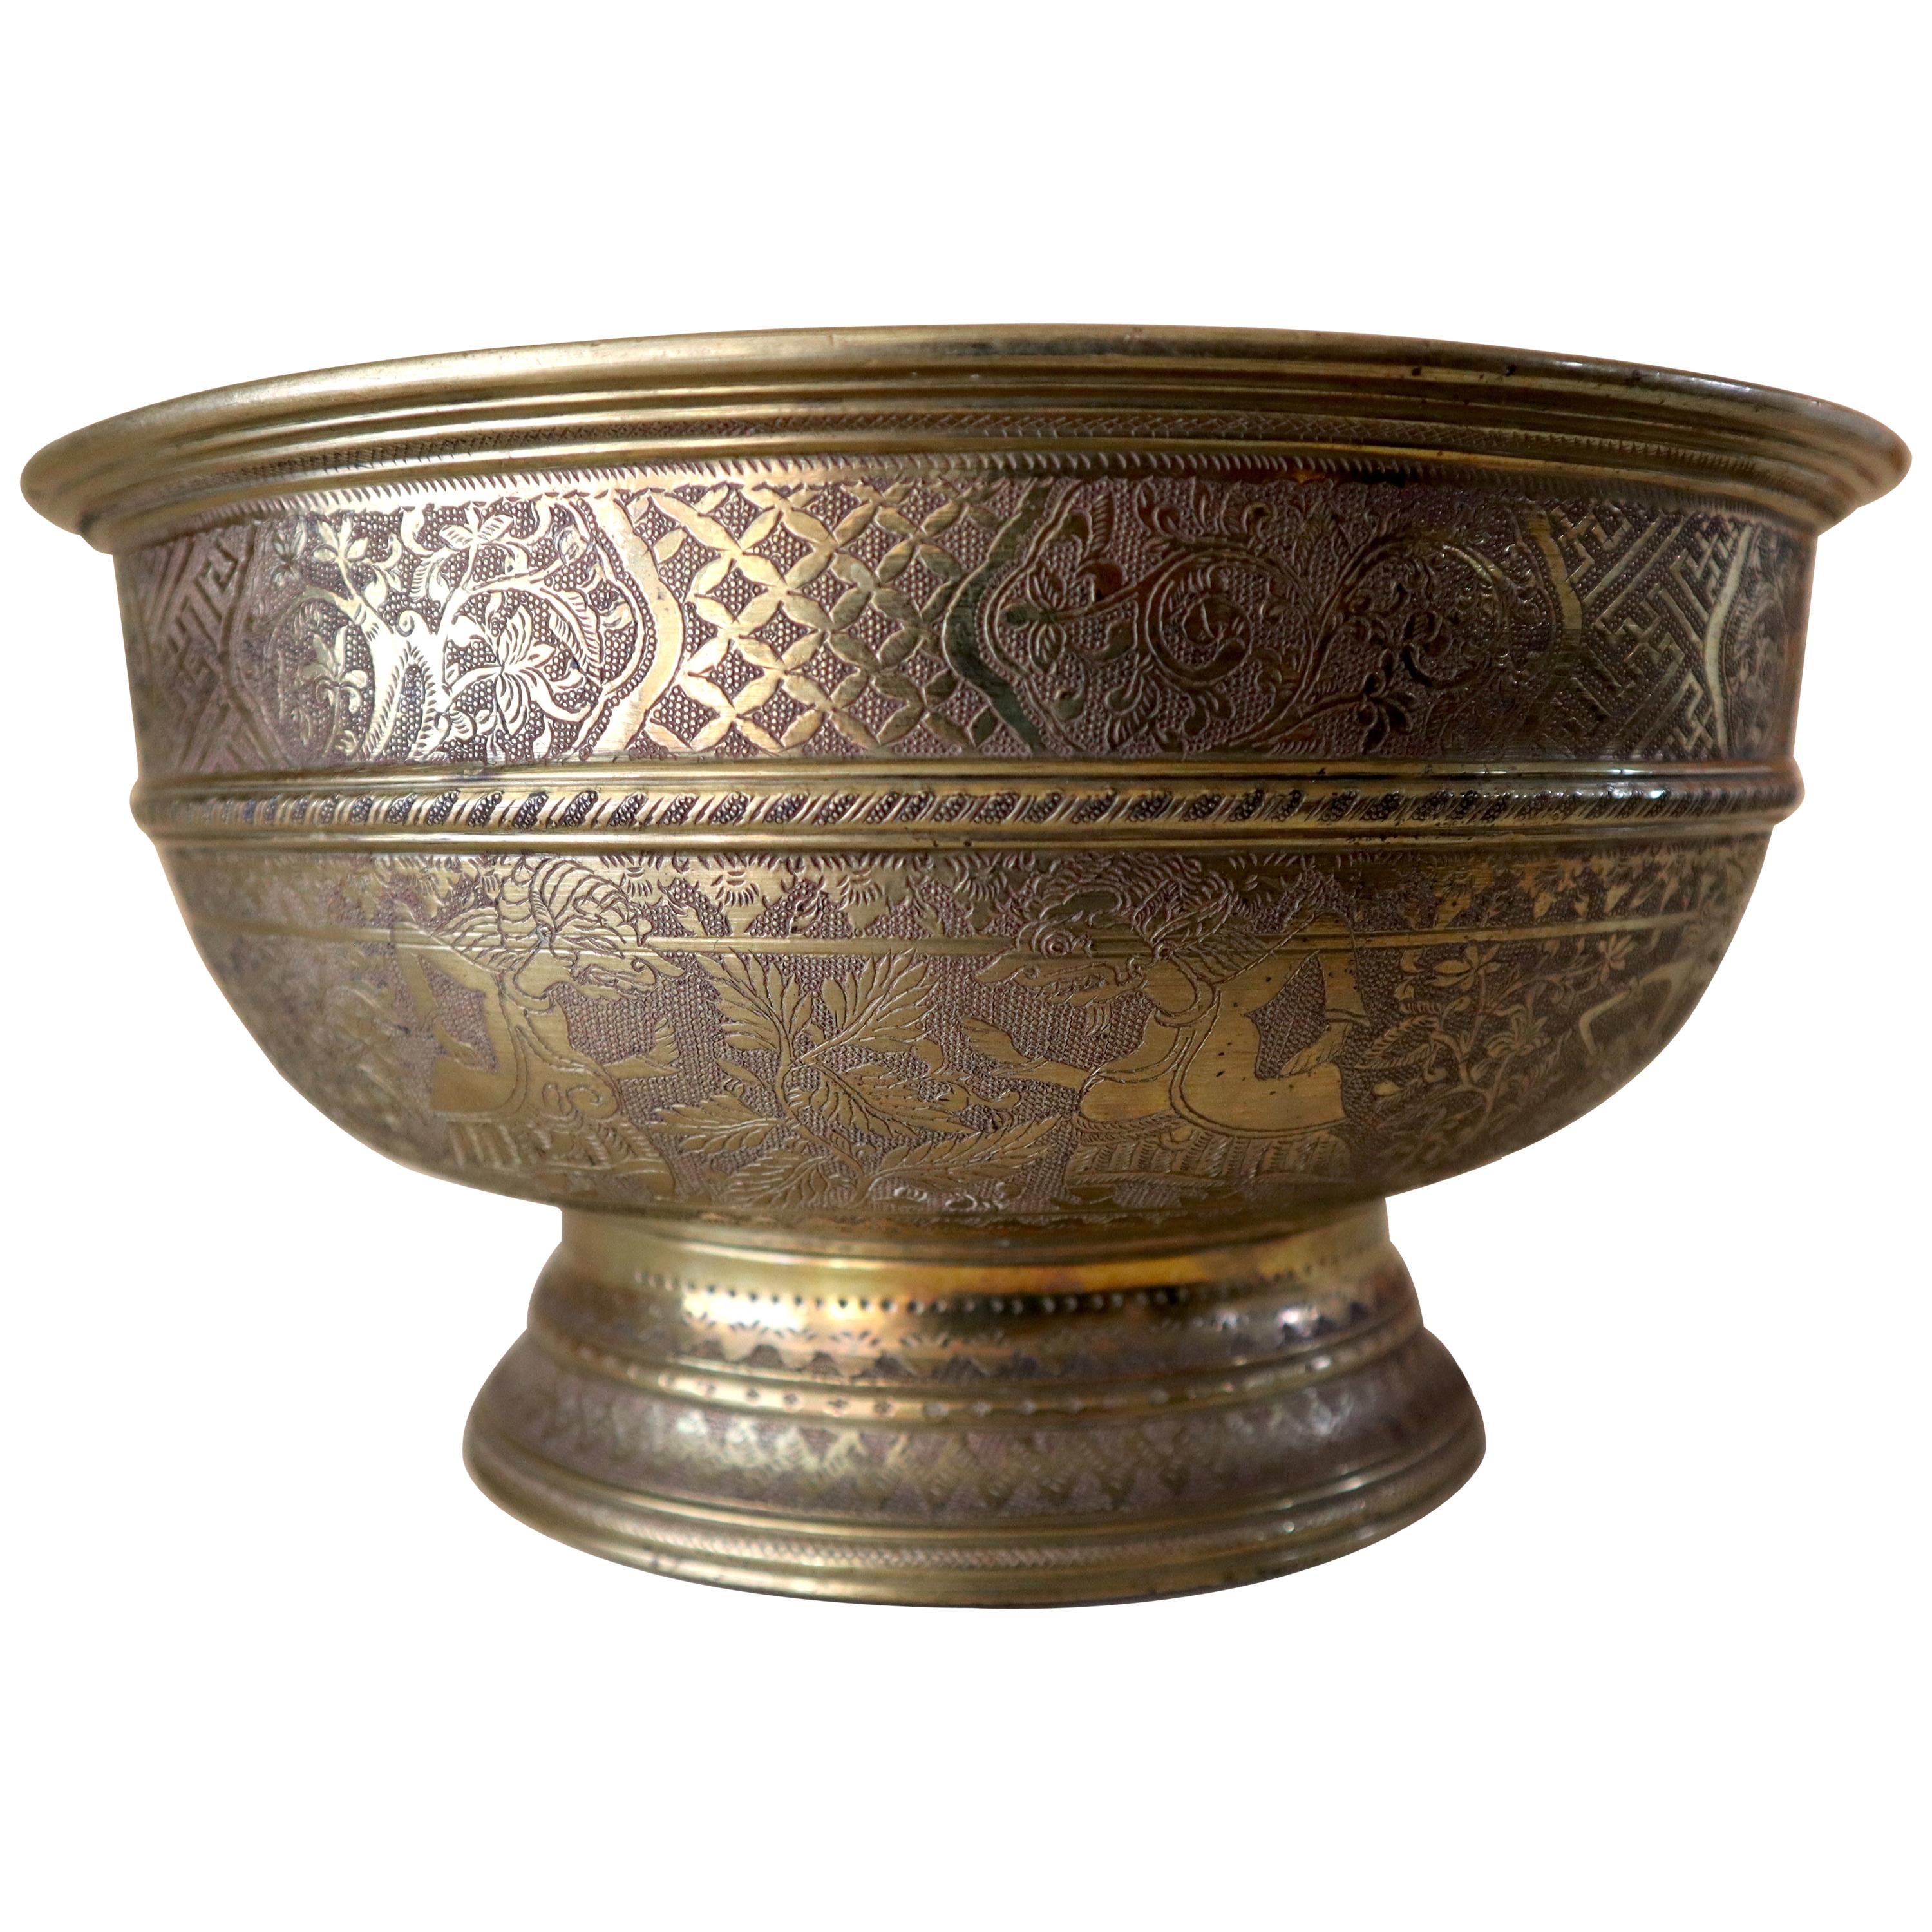 Ex Museum Early 20th Century Brass or Bronze Bowl Java Bali Indonesia For Sale